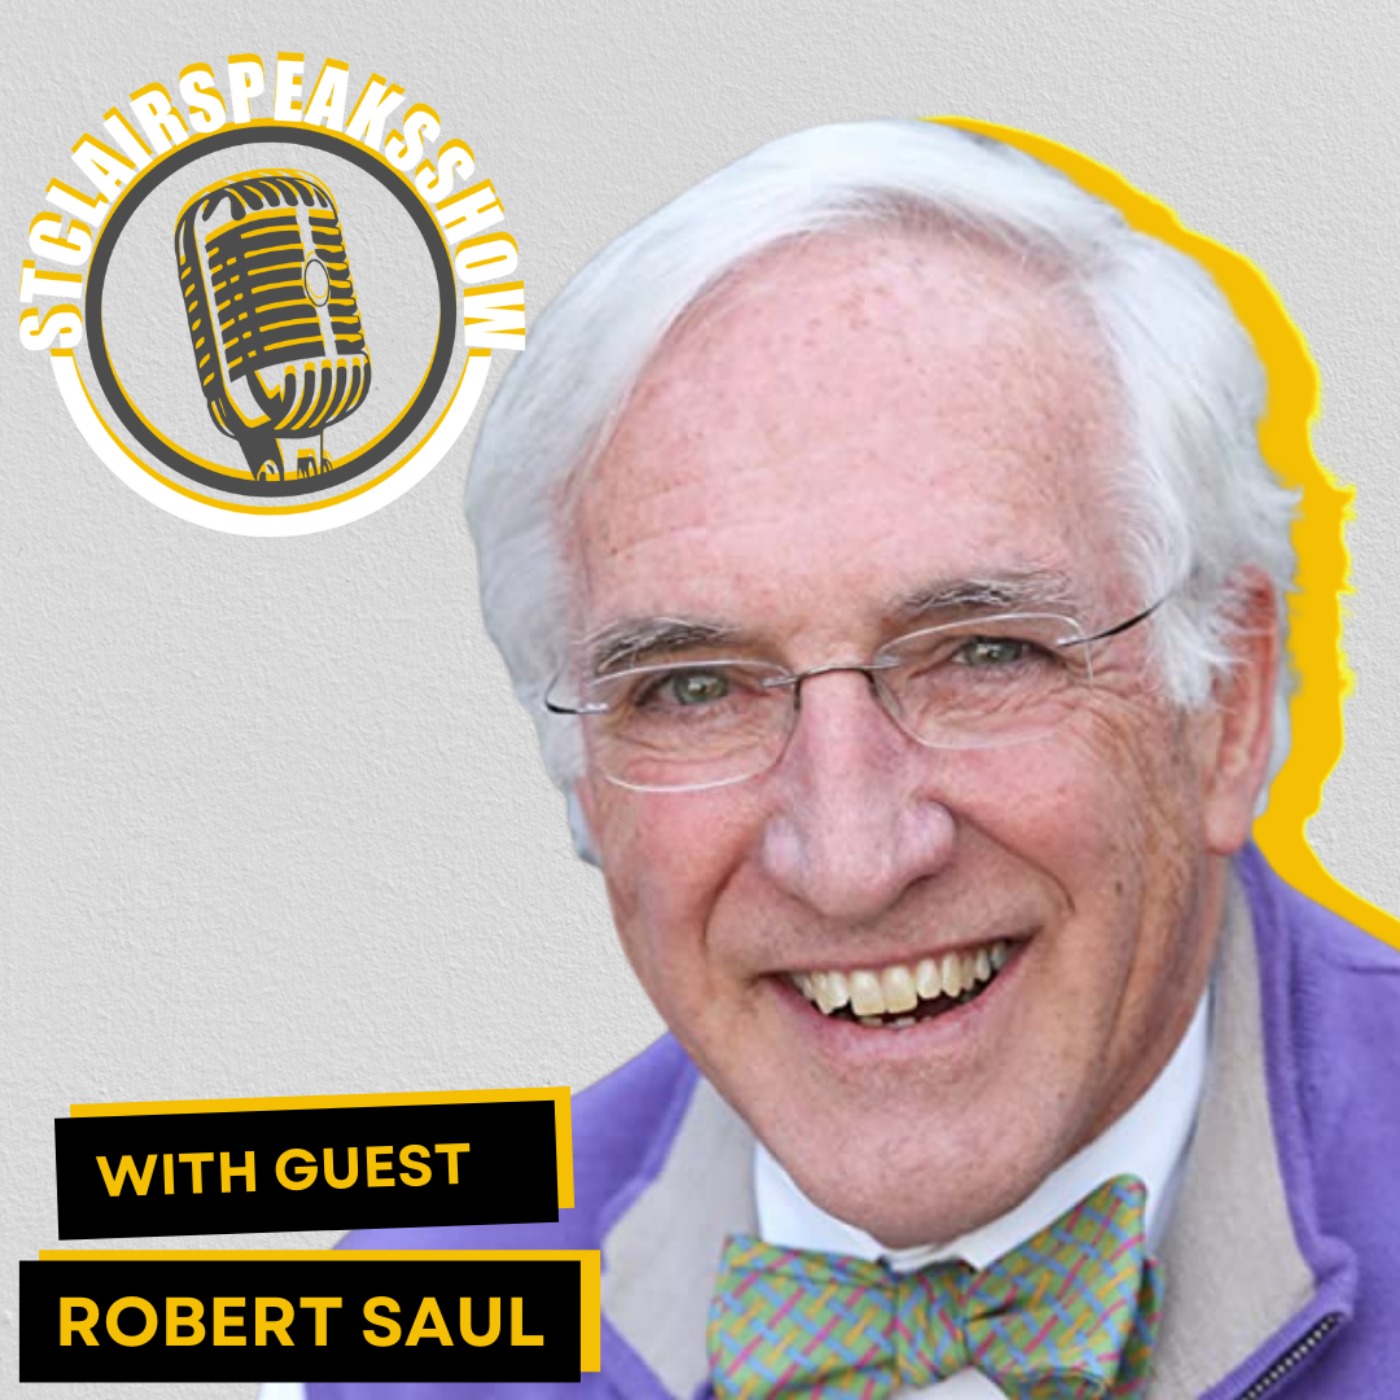 The StclairSpeaksShow Podcast with Robert Saul - Conscious Parenting & Forgiving Yourself Image